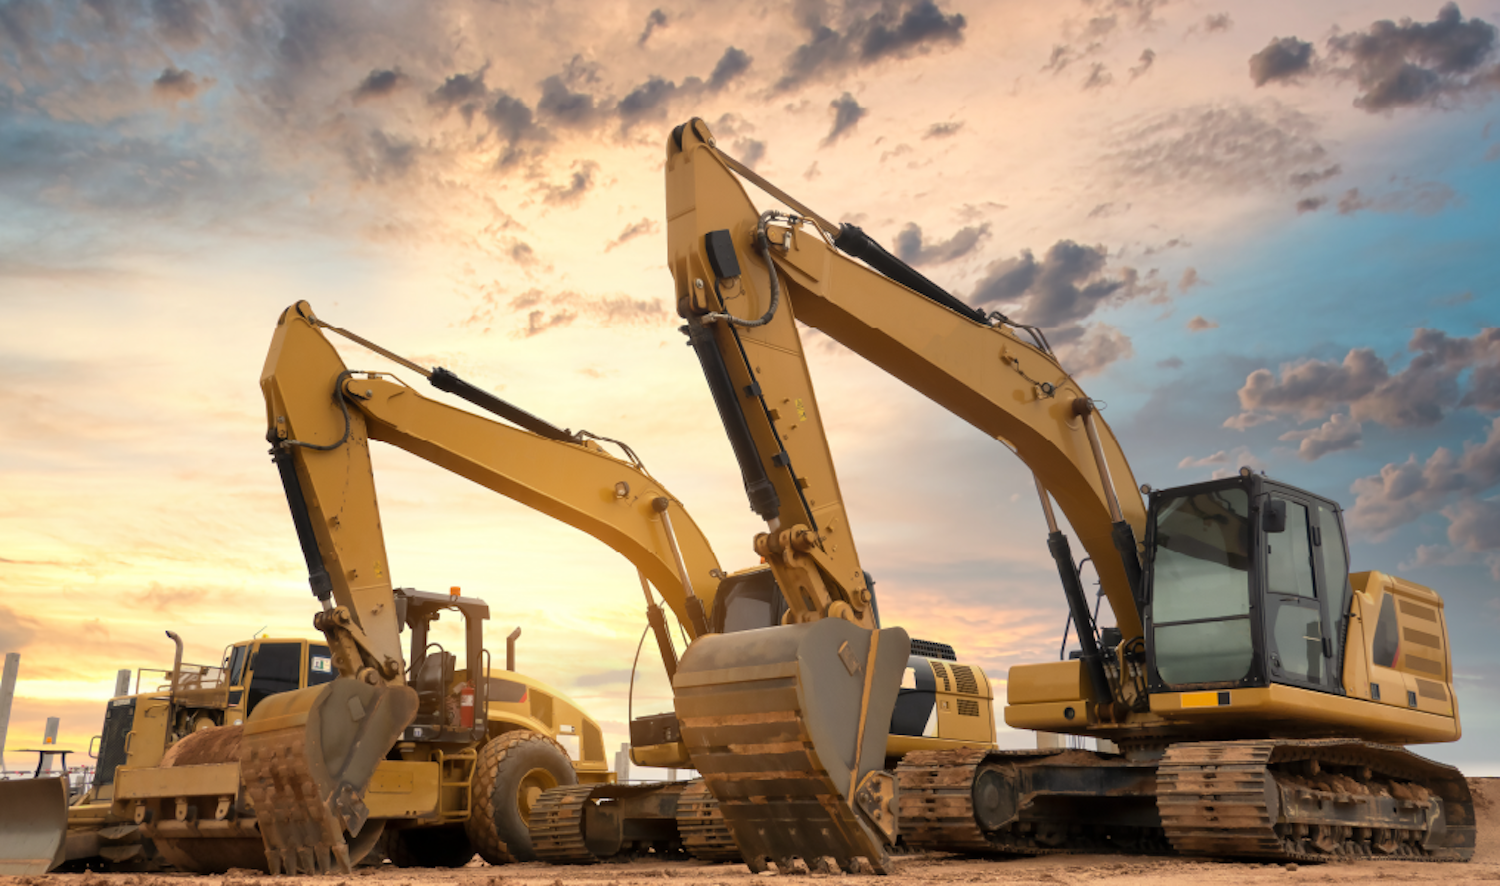 Construction machinery business